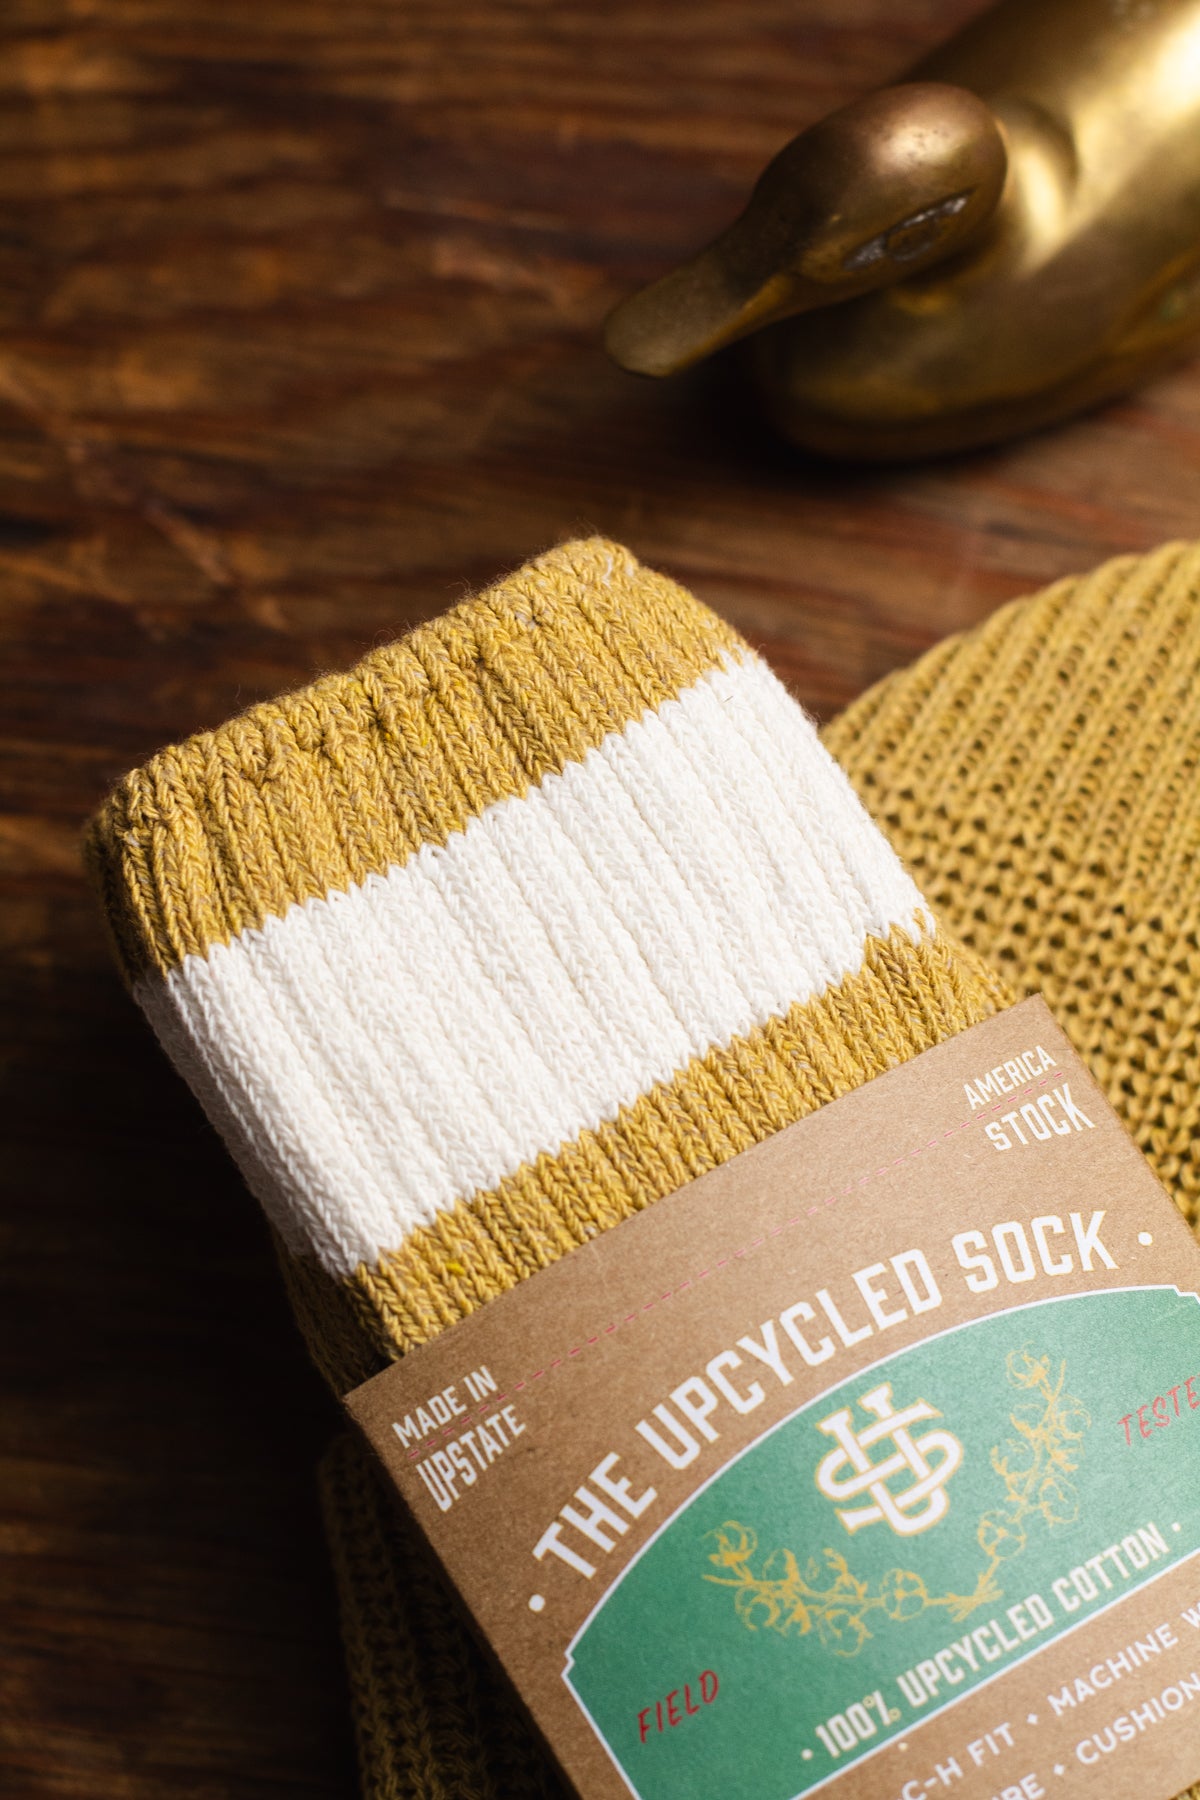 The Upcycled Sock - Straw